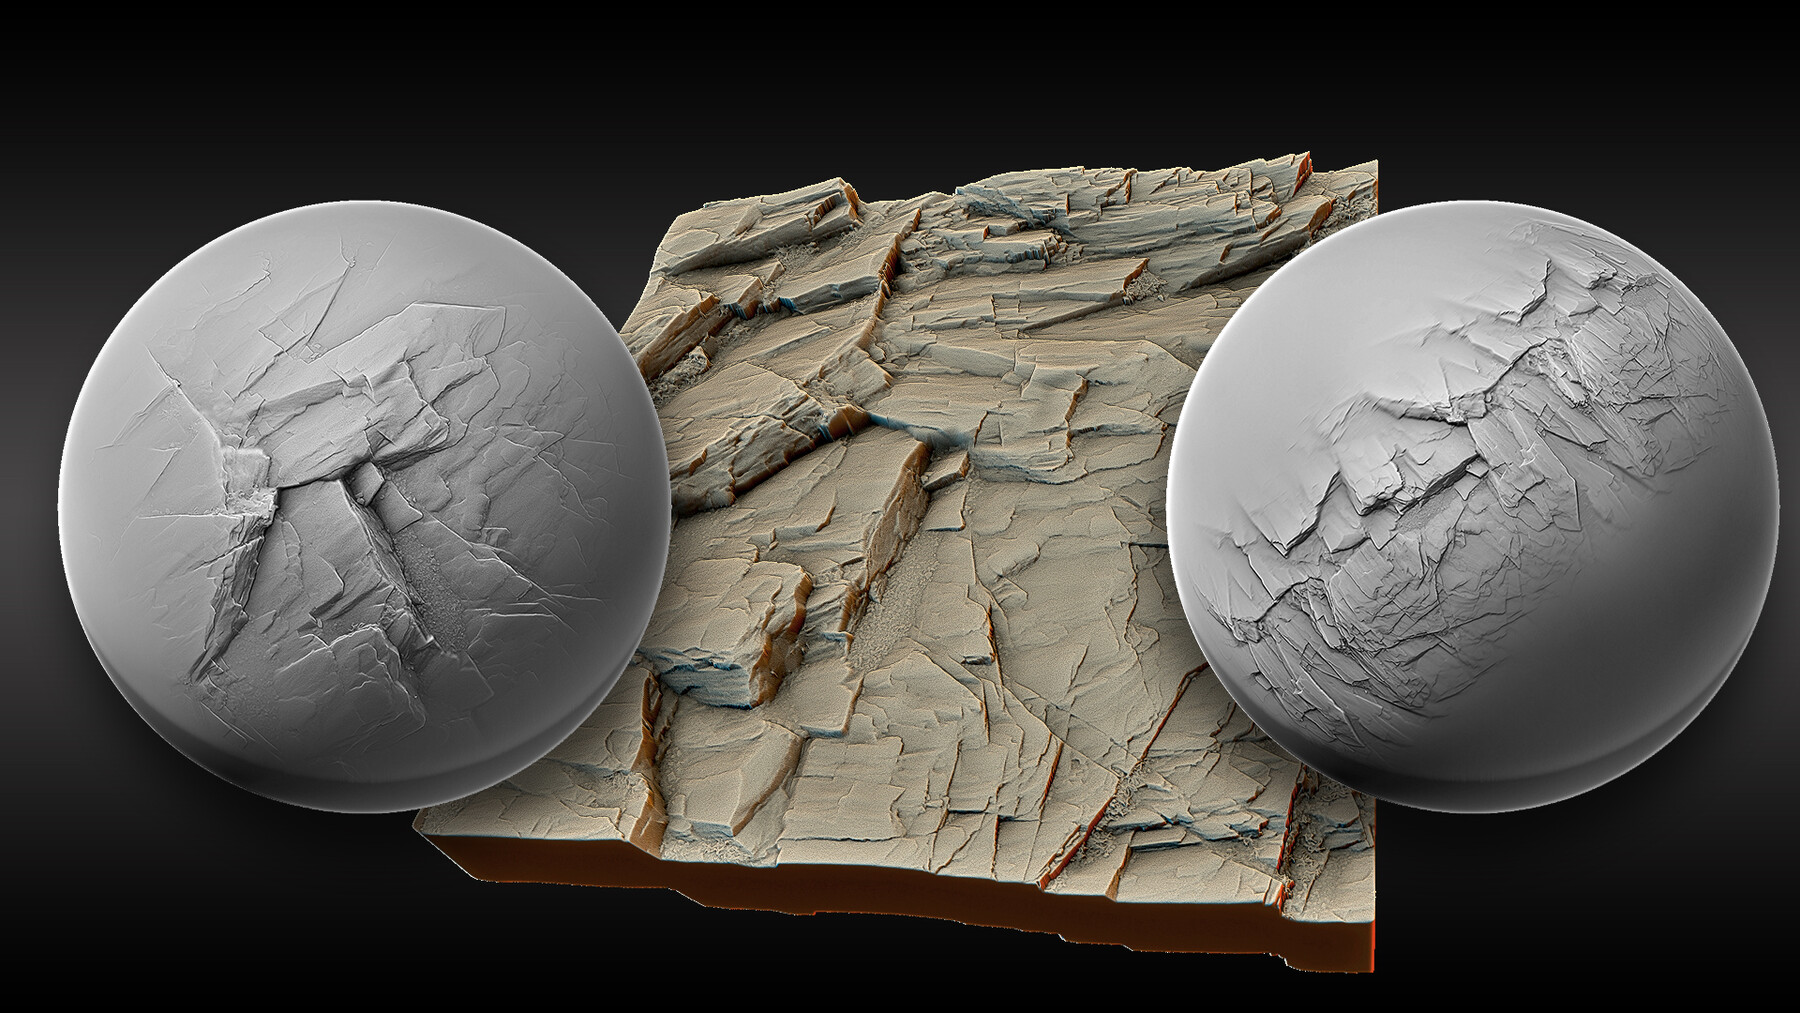 makign a rock and coloring in zbrush